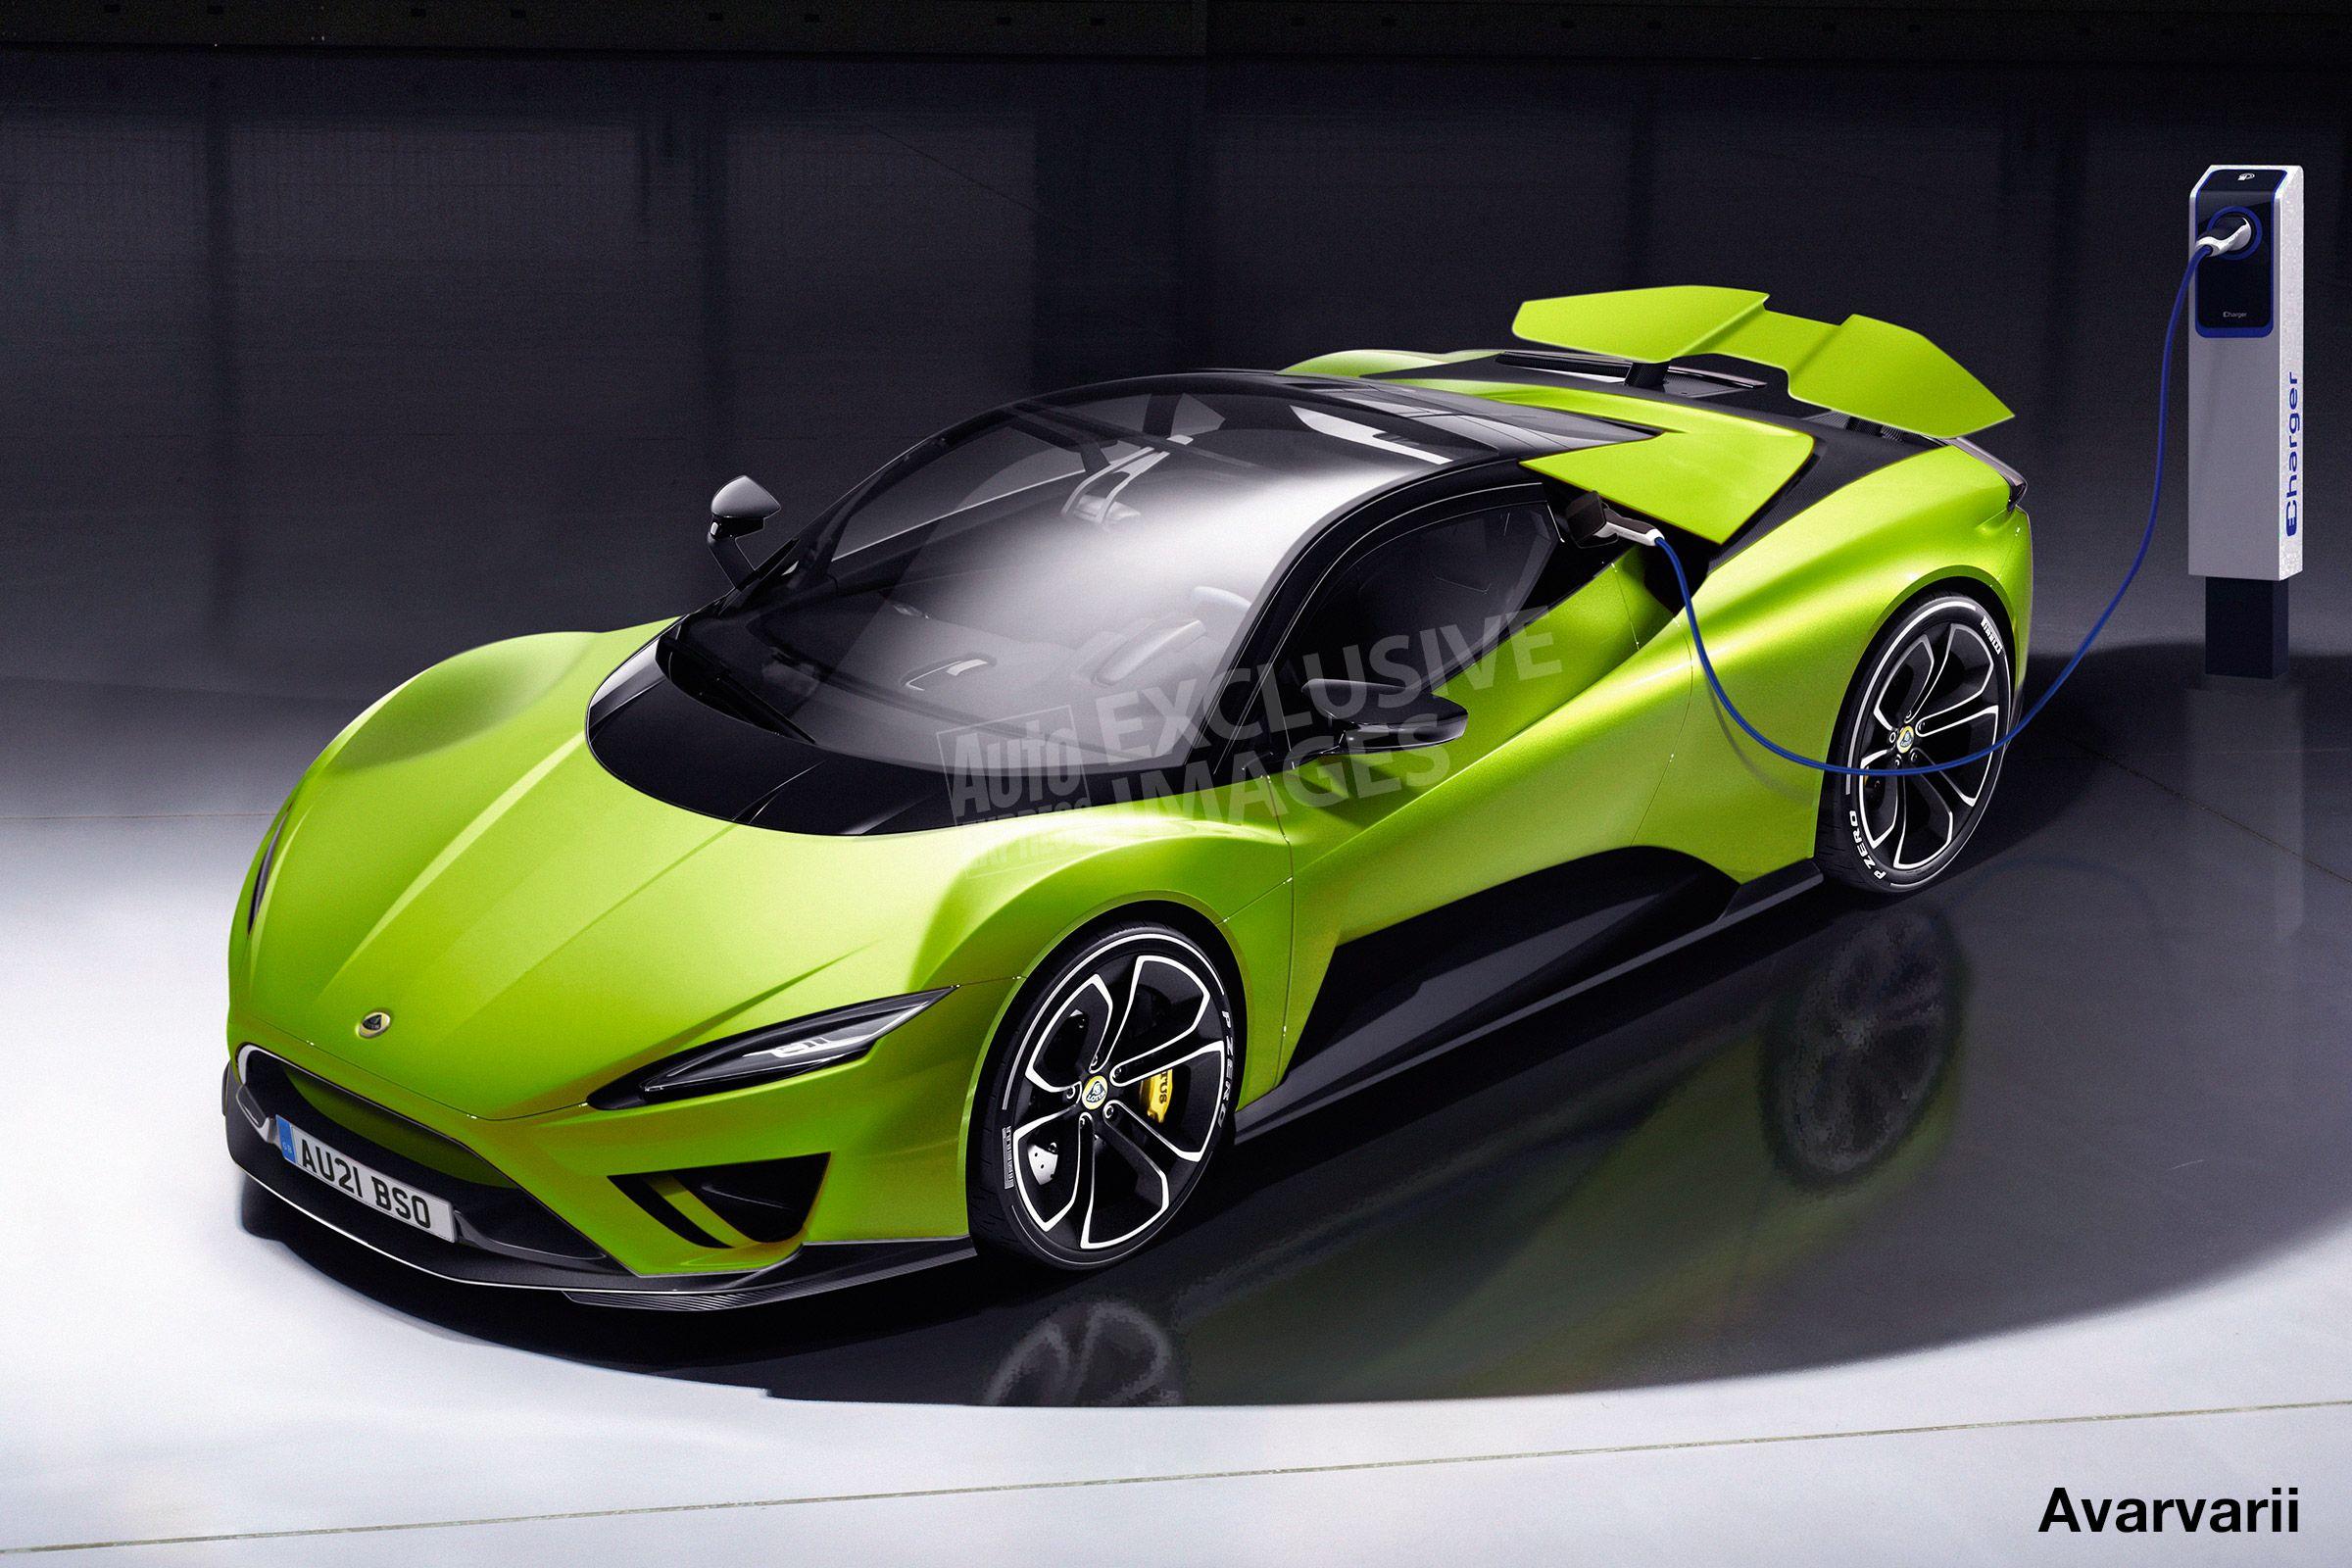 The Lotus Type 130 hypercar could have up to 000bhp and is